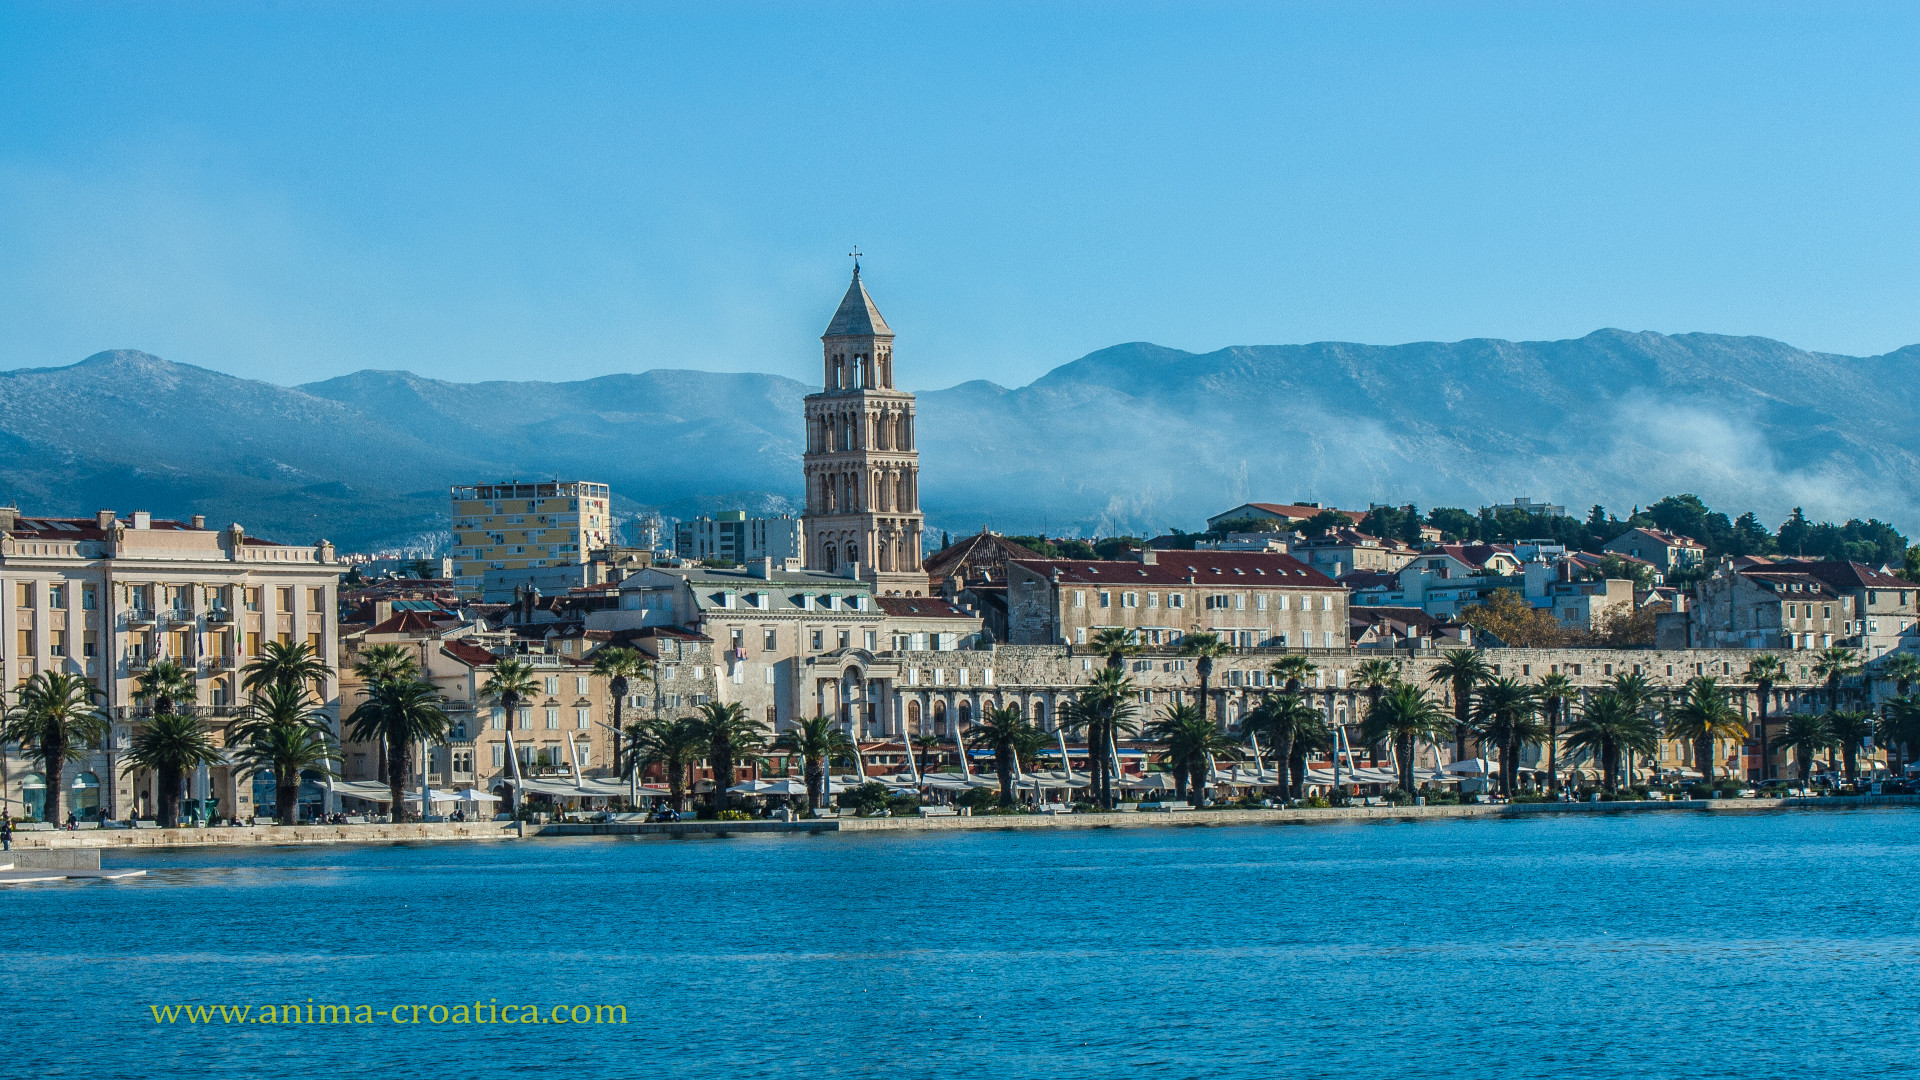 Discover Split's charms immersive multisport experiences with Soul of Croatia